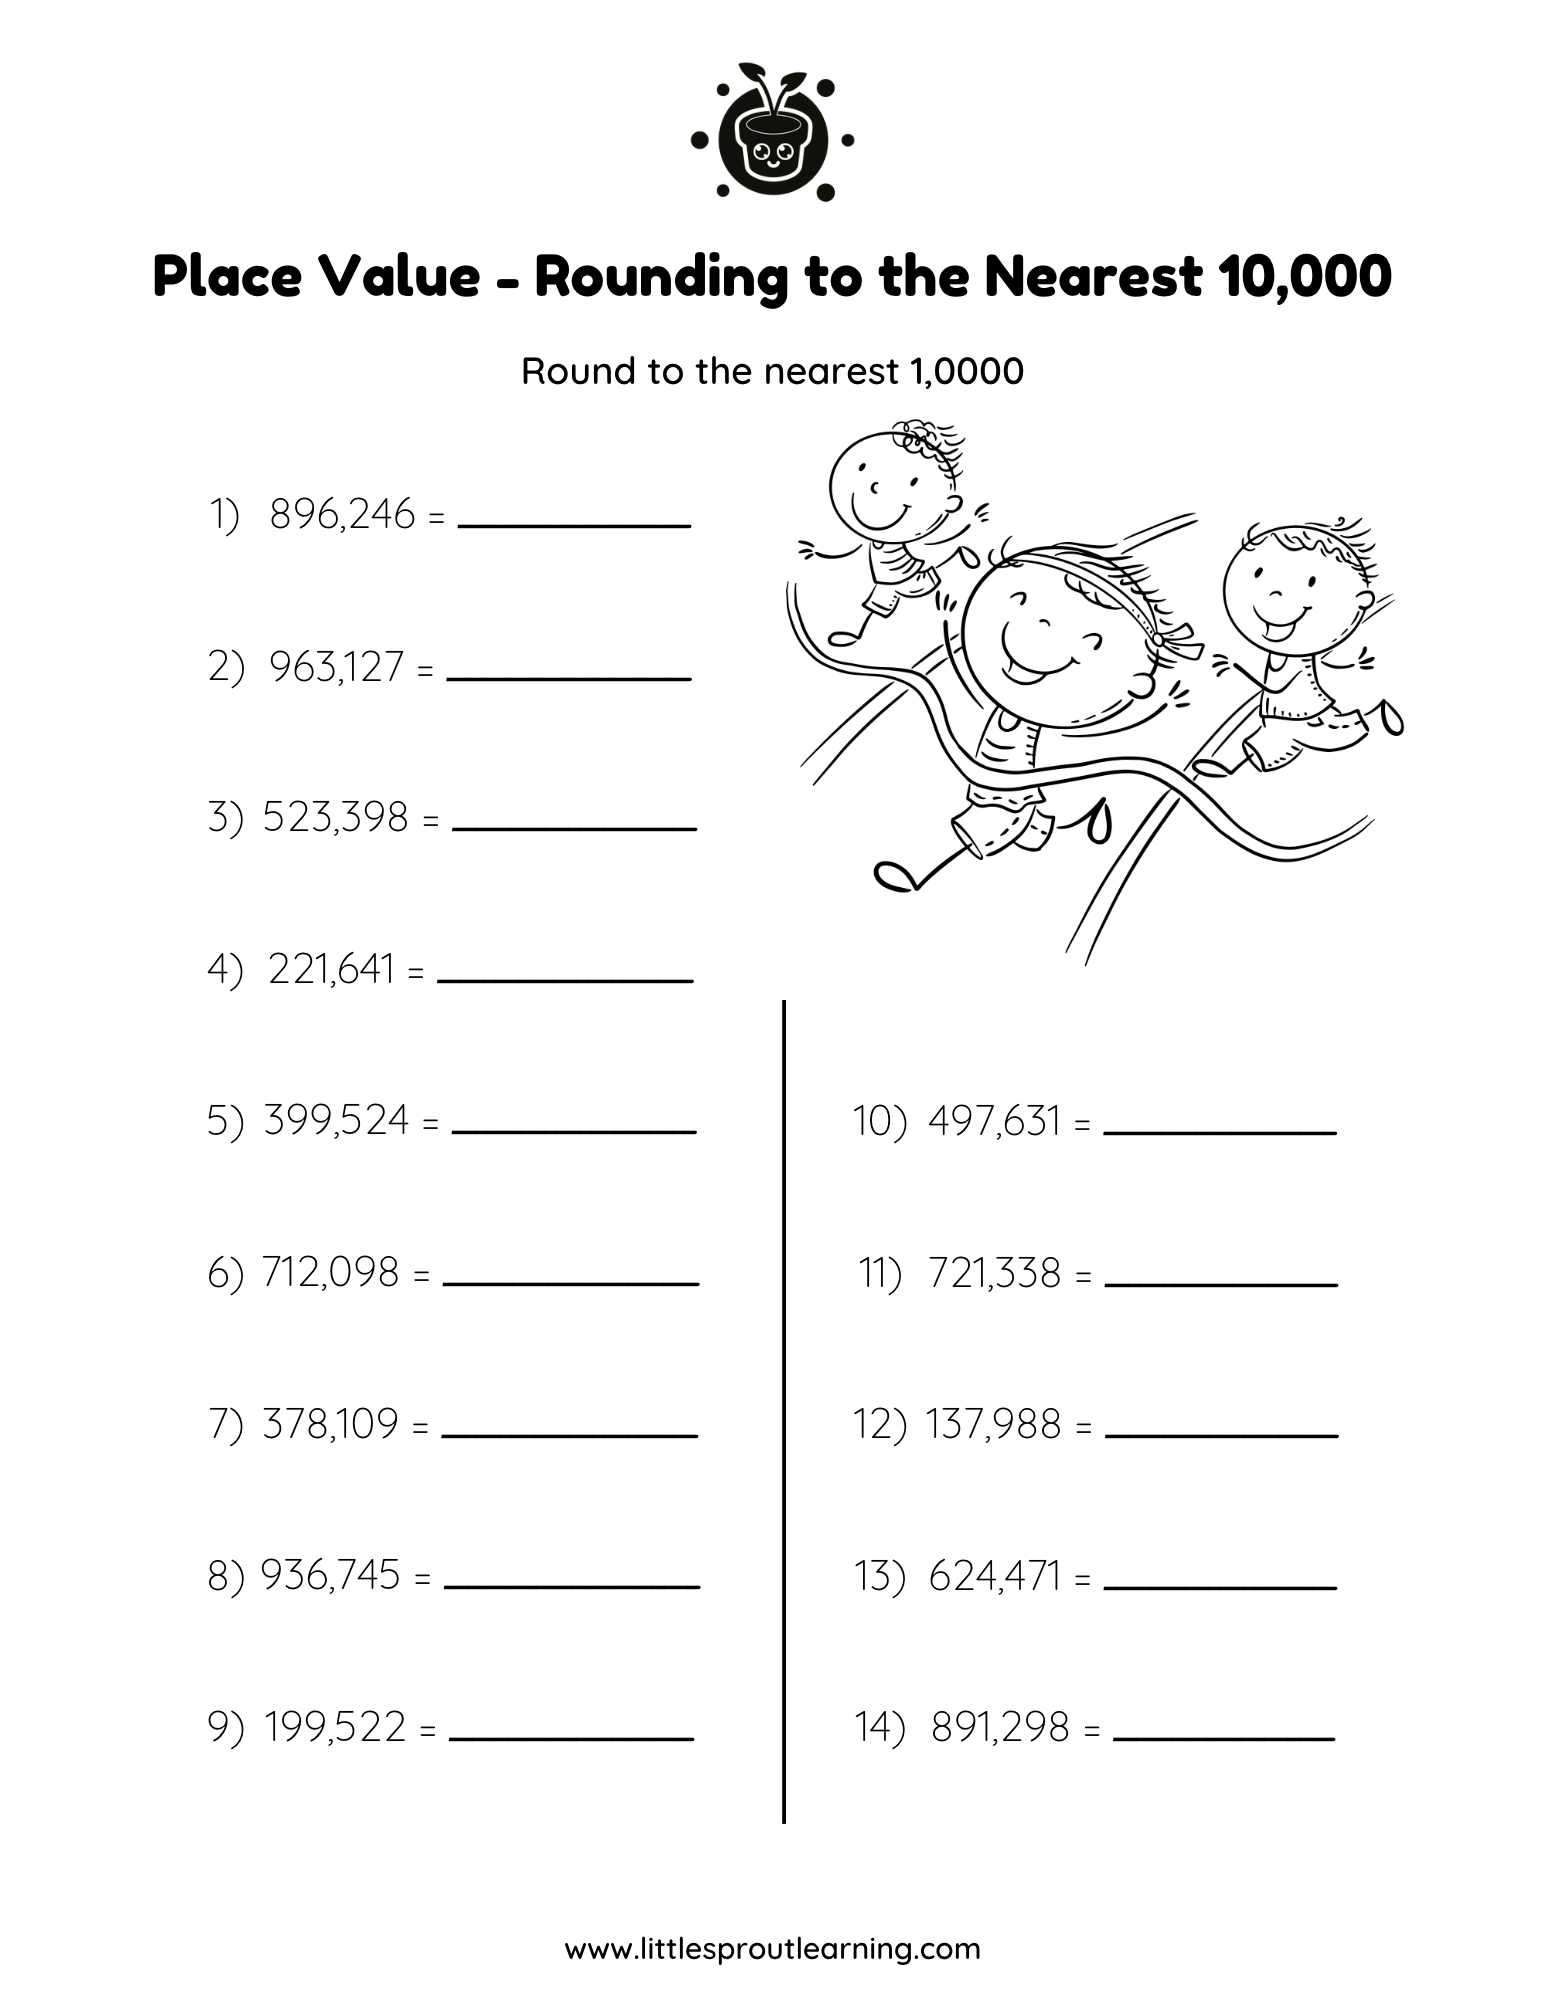 Grade 4 Math Place Value Worksheet Round to tHe Nearest 10,000